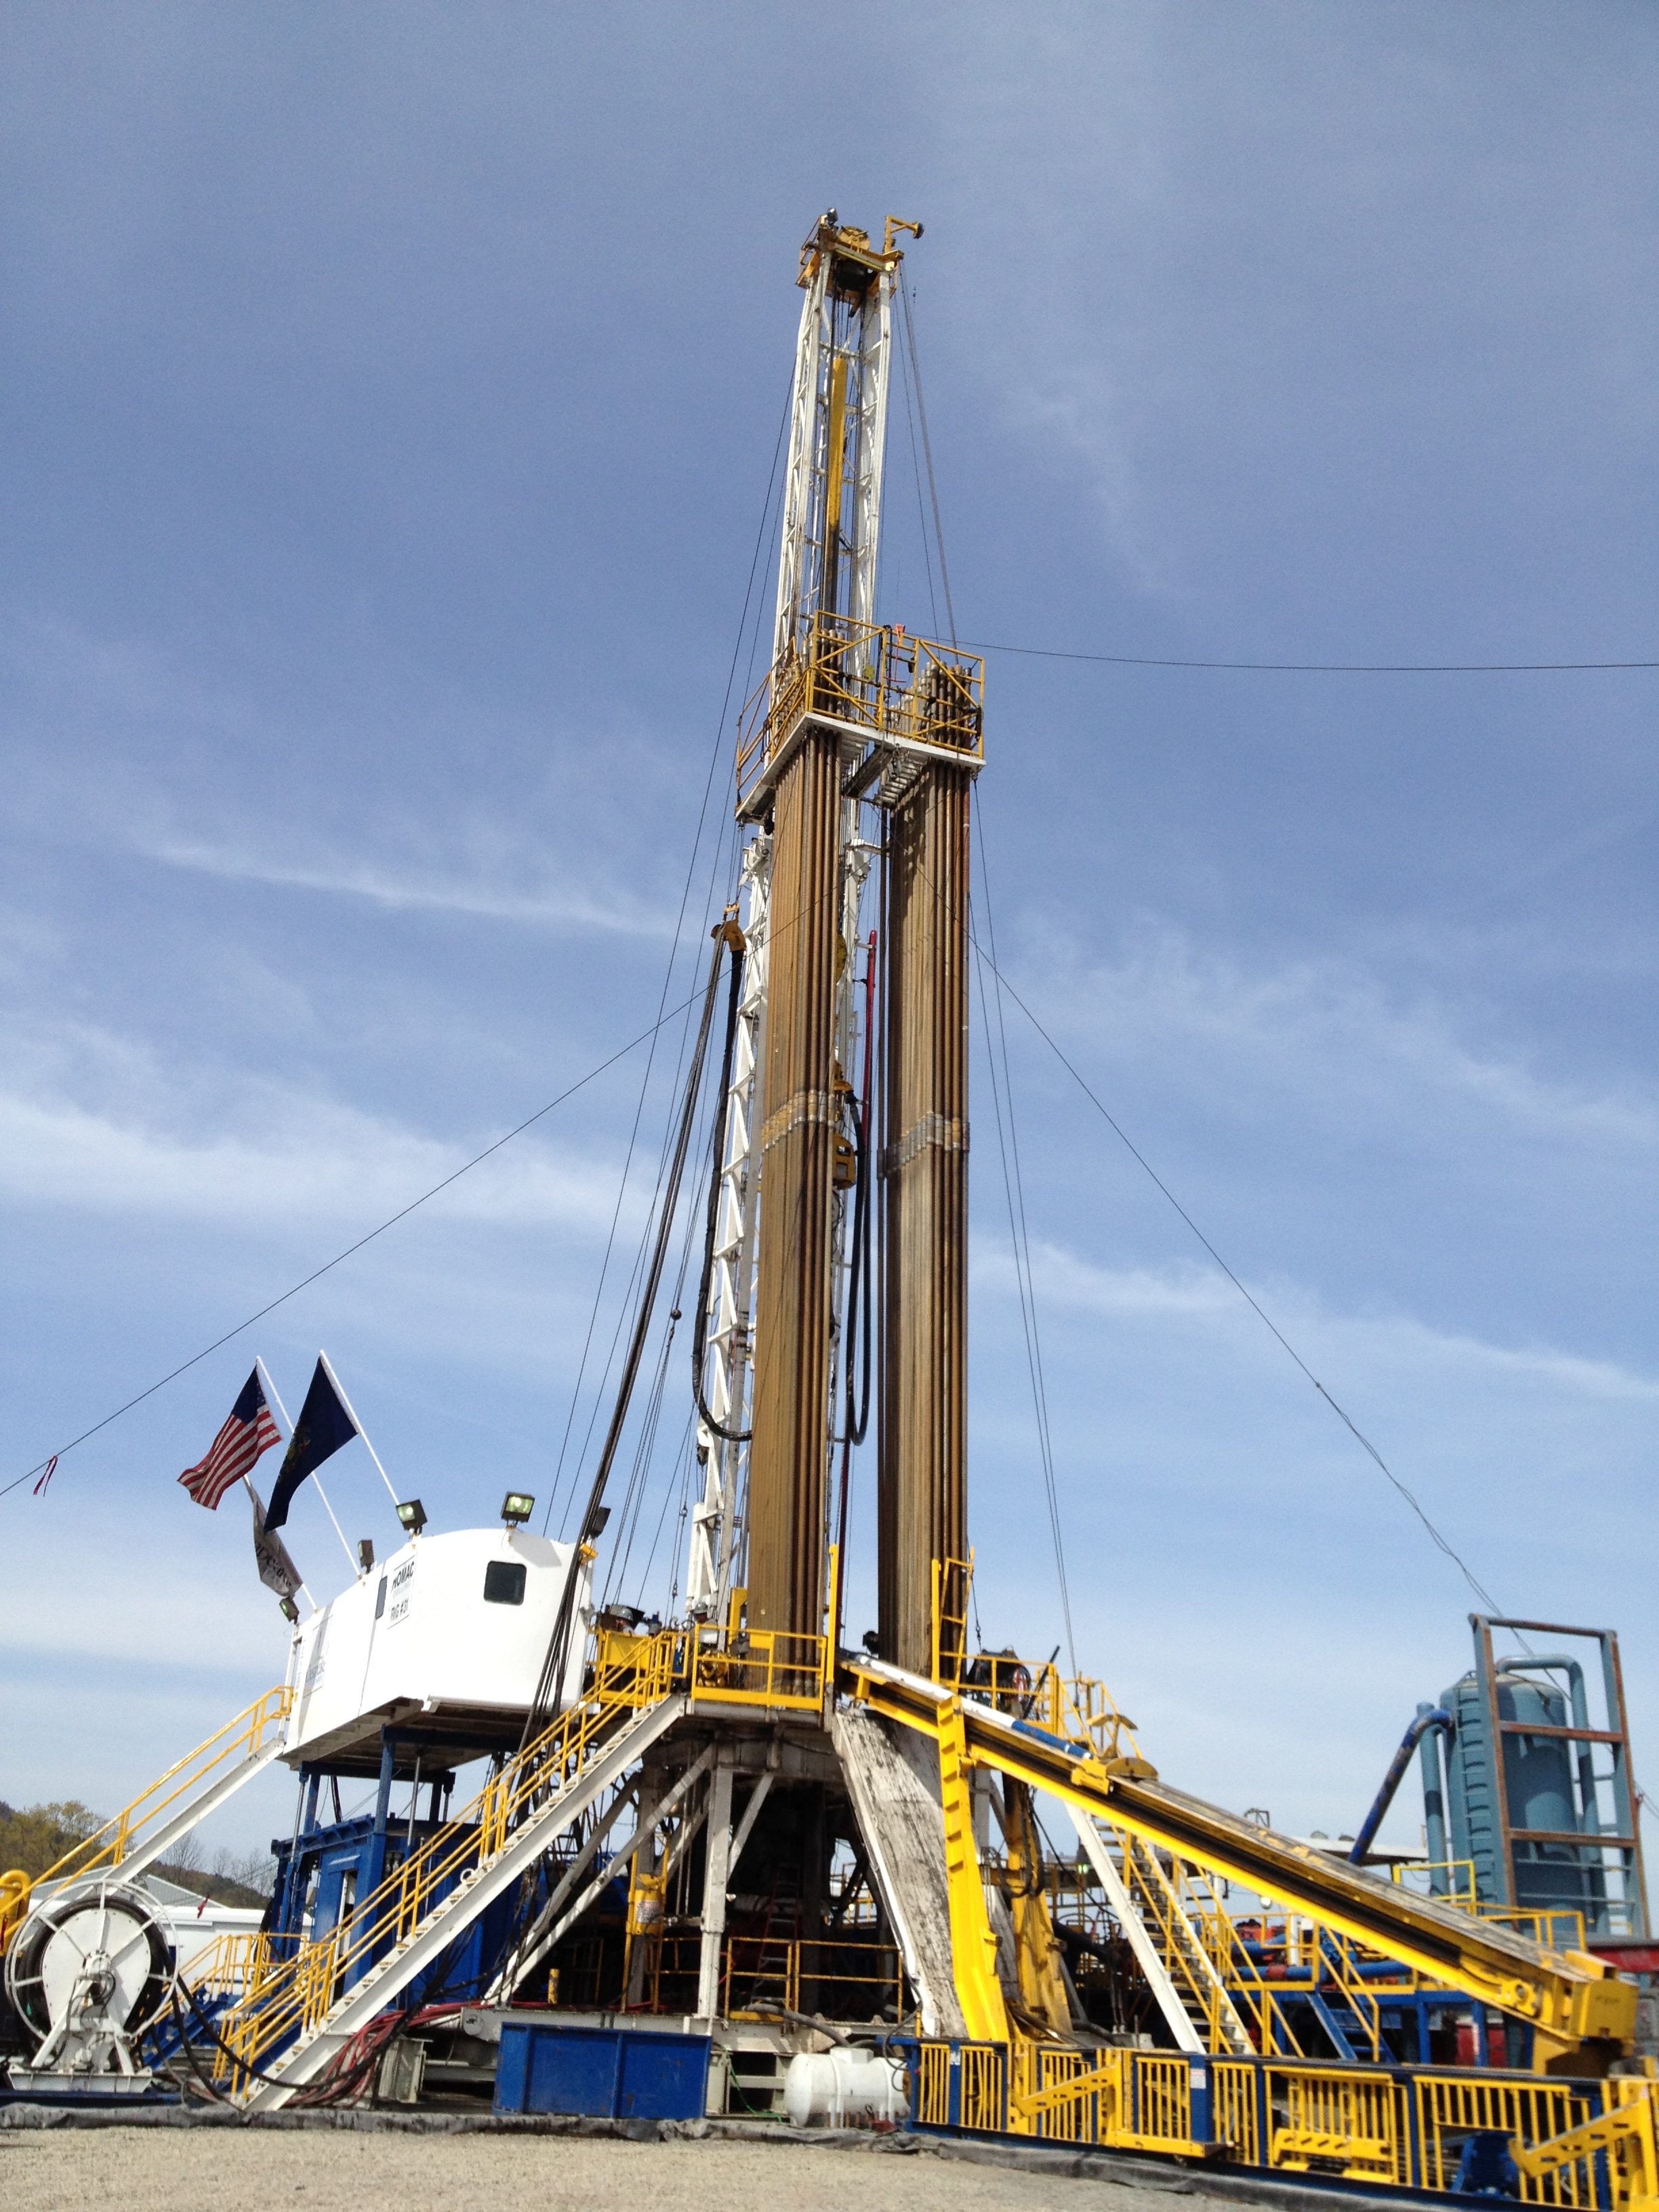 Lehigh University Marcellus Shale - Hydraulic fracturing